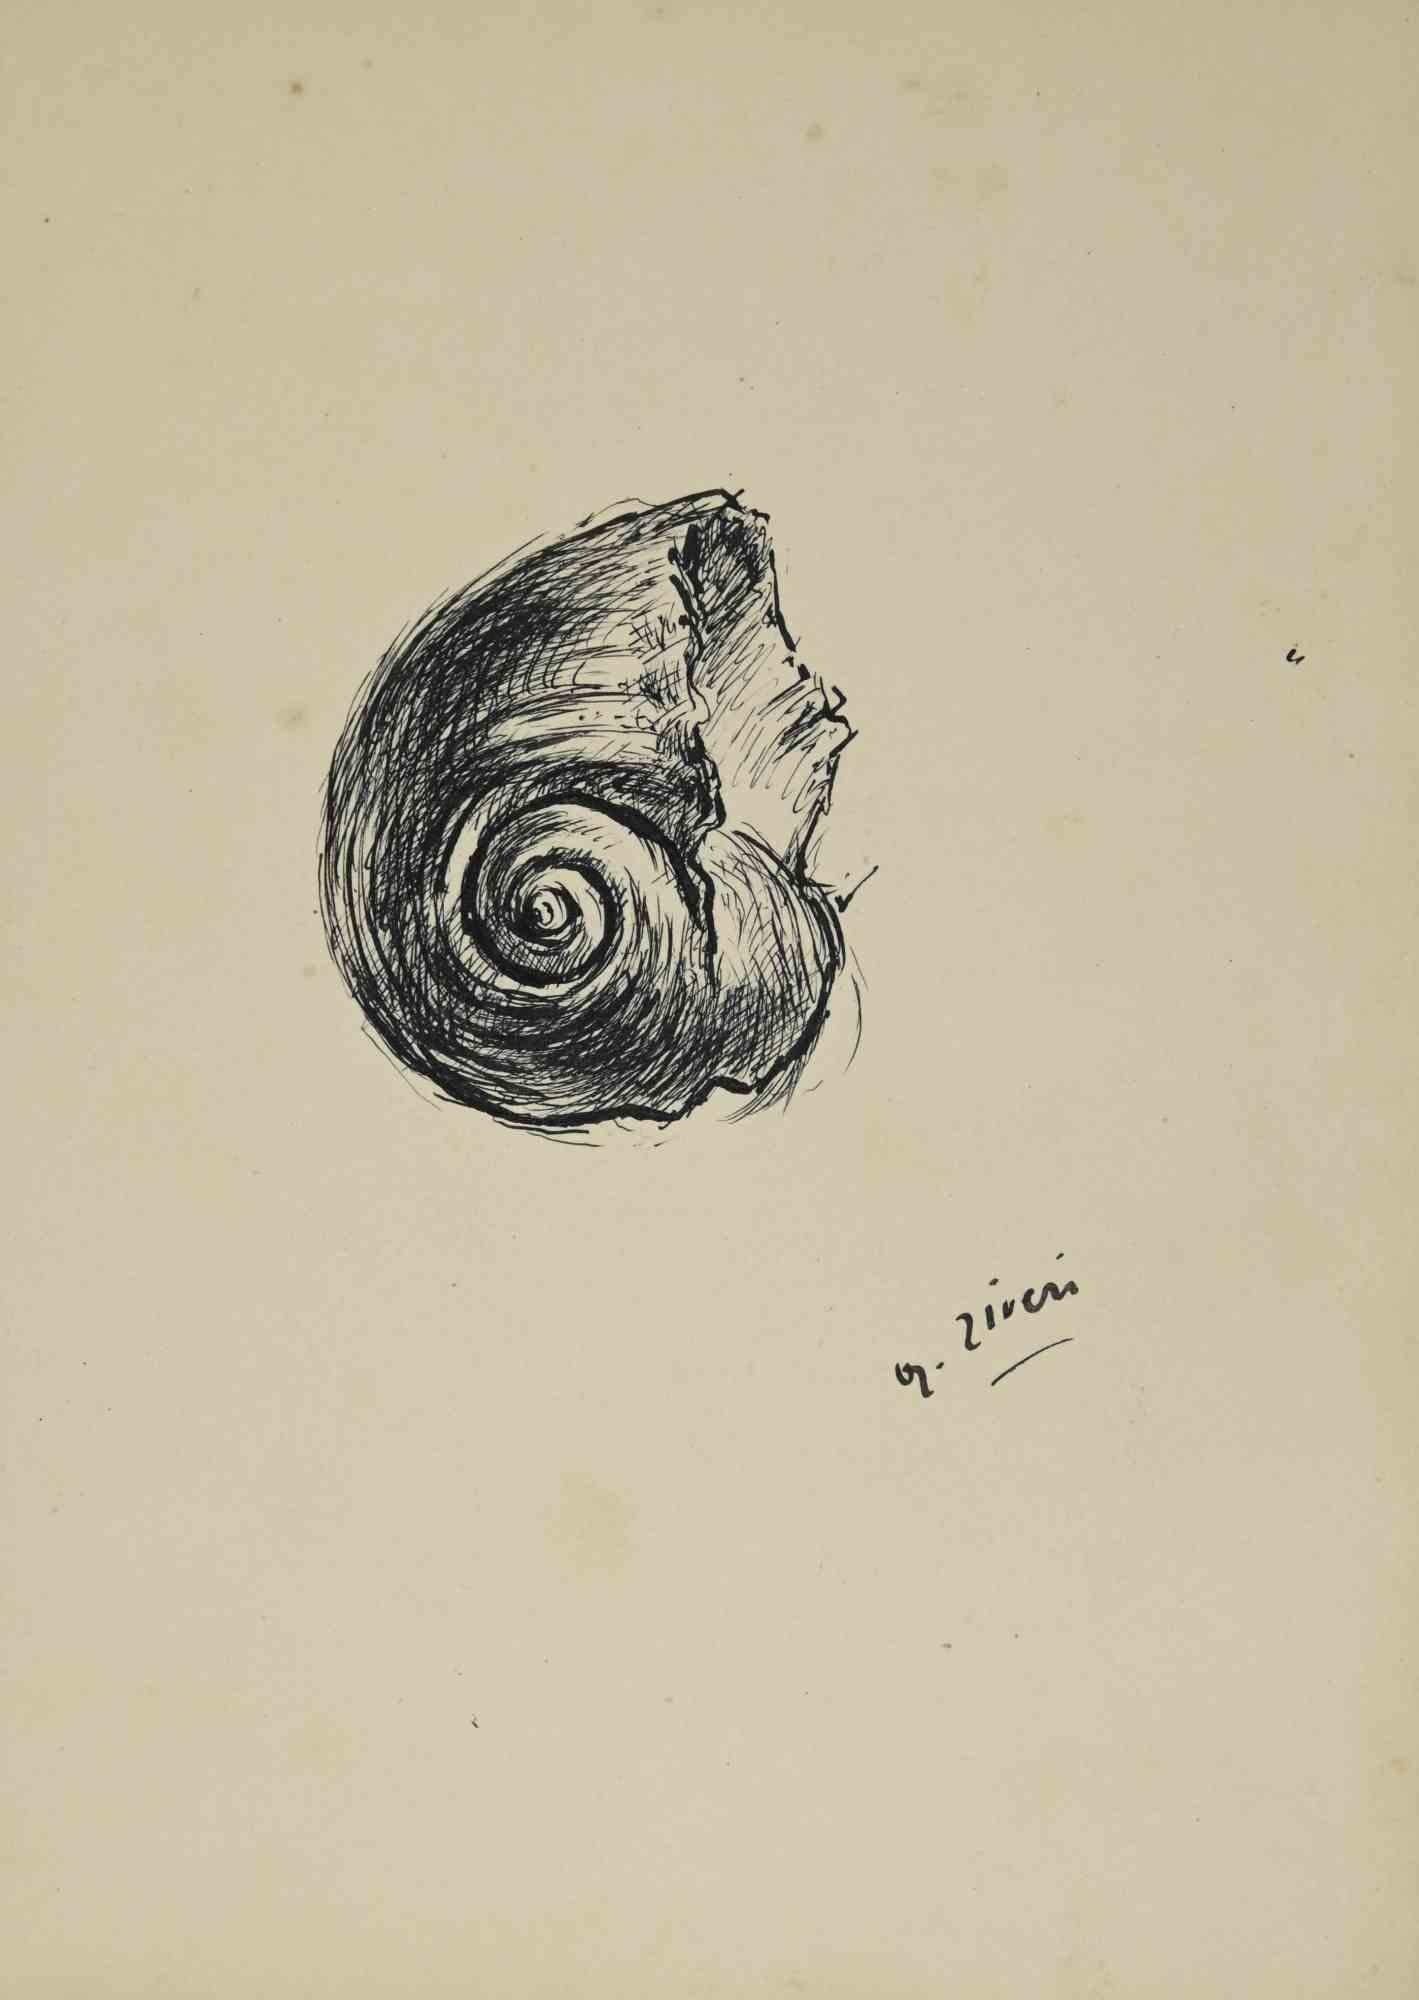 The Shell is a drawing realized by Alberto Ziveri in the 1930s.

Ink on paper.

Hand-signed.

In good conditions with slight foxing.

The artwork is represented through deft strokes masterly.

Alberto Ziveri (Rome,1908 – 1990), the Italian painter